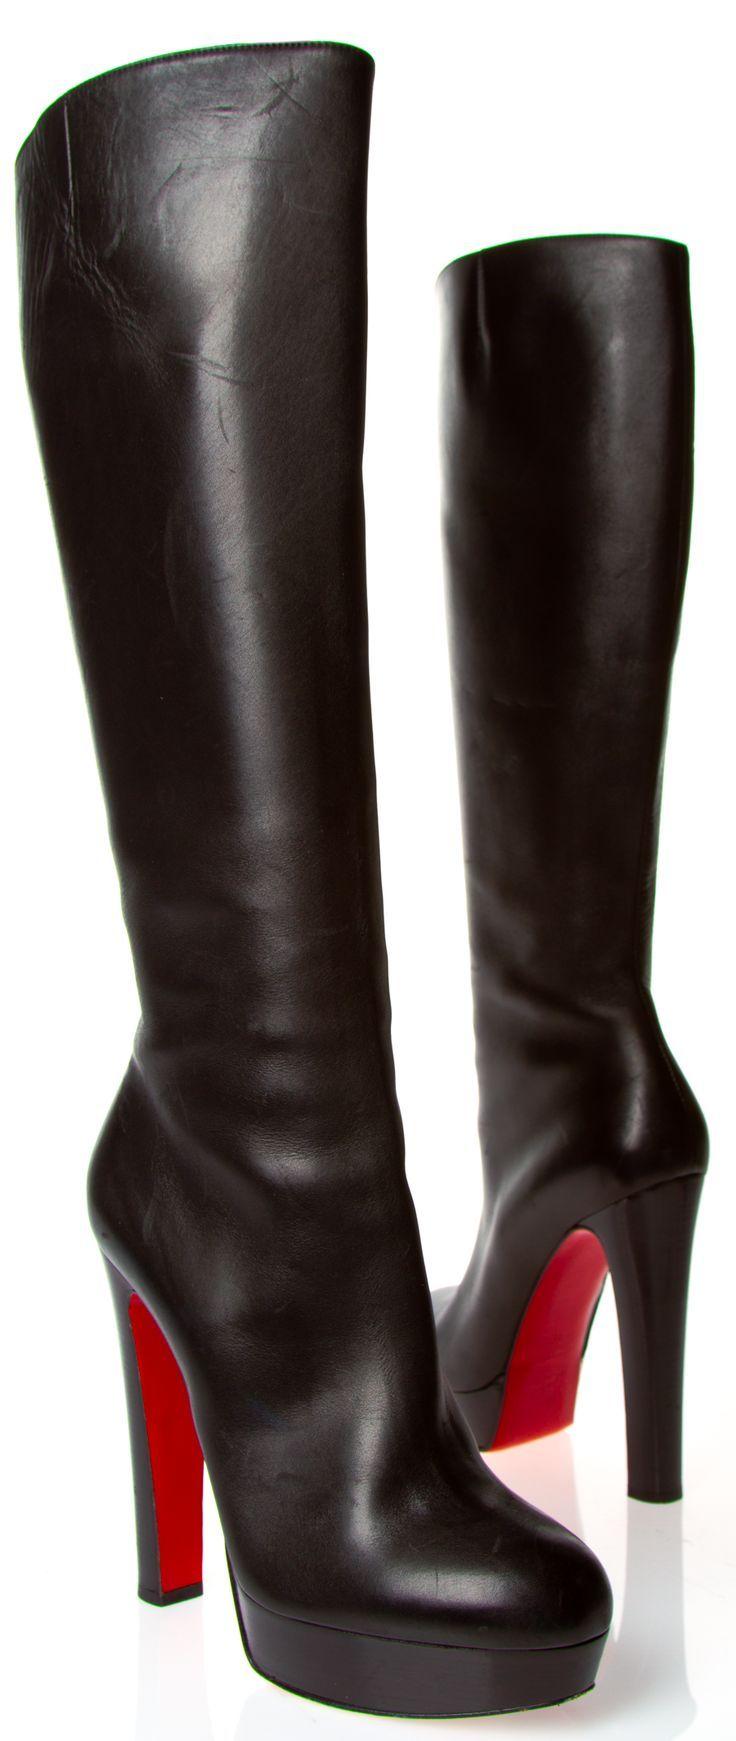 Wedding - BOOT LOVER FETISH , SHOEBOOT'S, OVER THE KNEE BOOTS